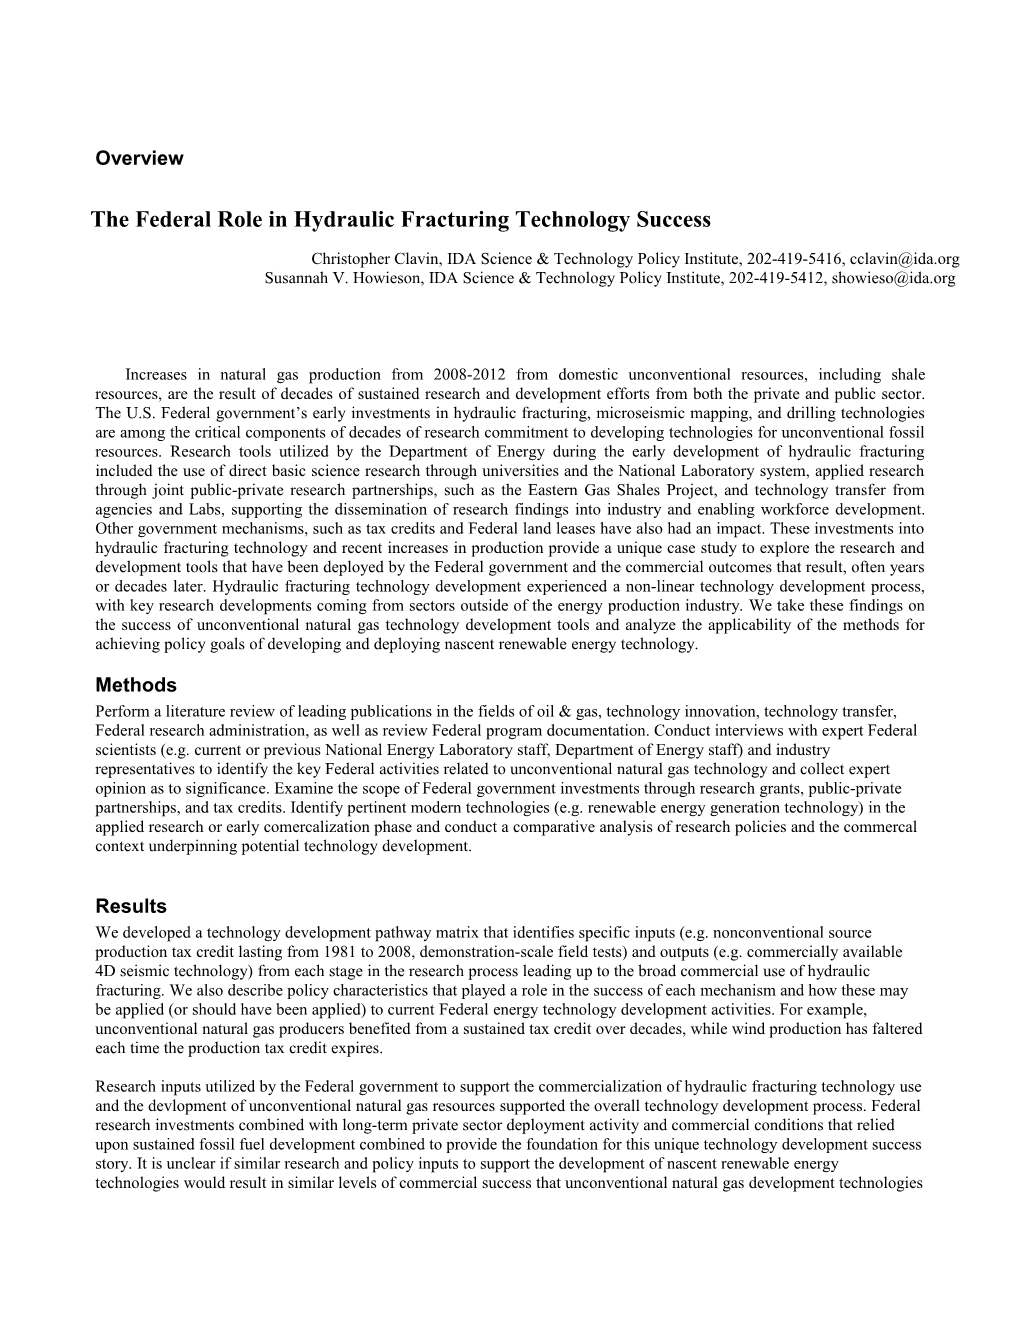 The Federal Role in Hydraulic Fracturing Technology Success